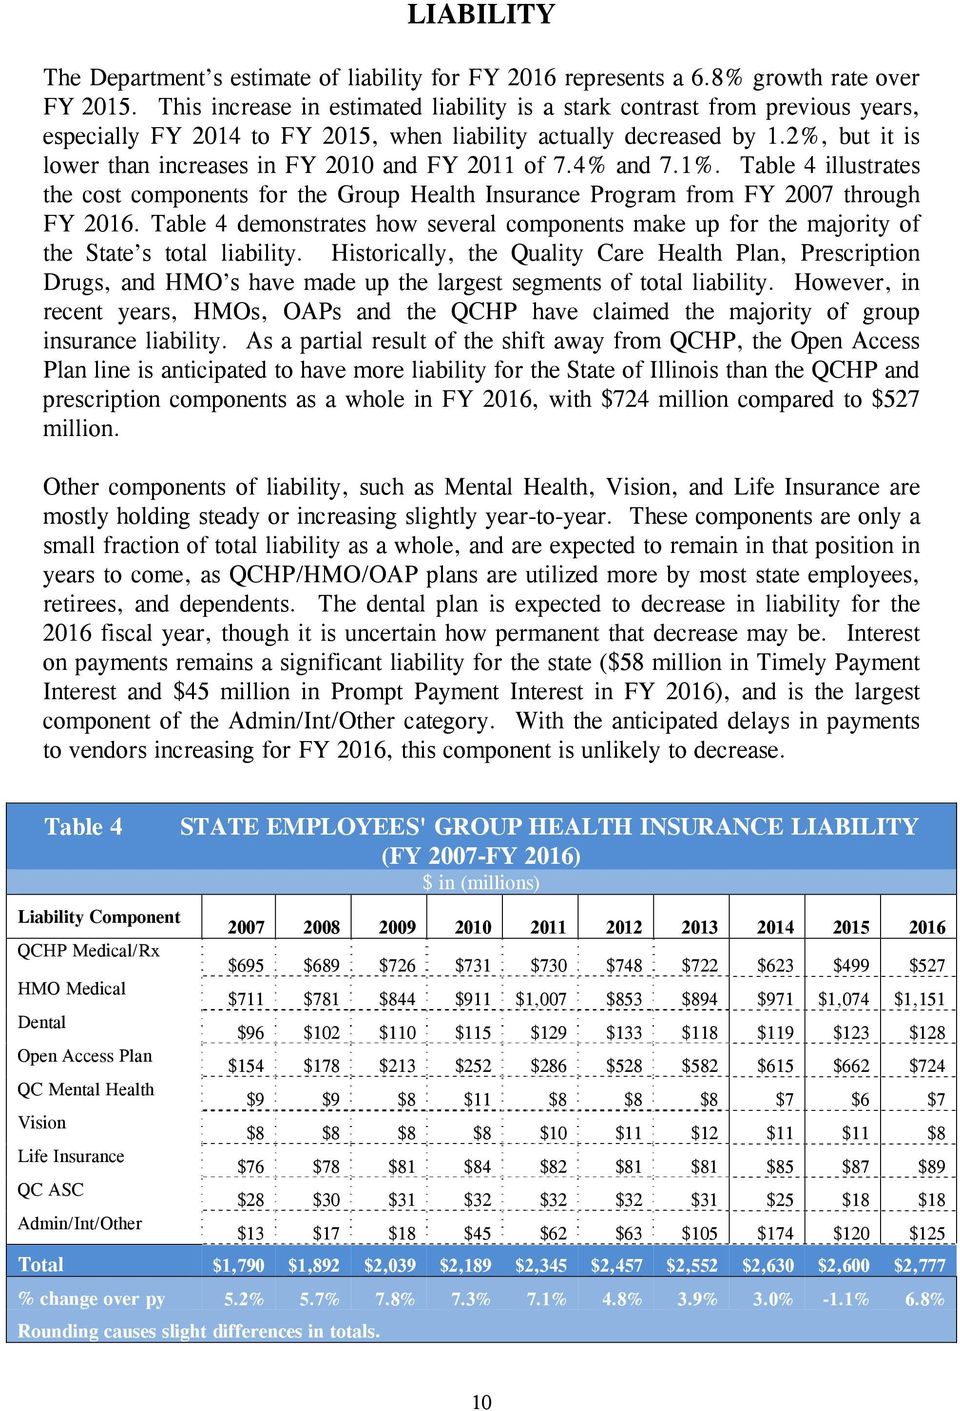 2%, but it is lower than increases in FY 2010 and FY 2011 of 7.4% and 7.1%. Table 4 illustrates the cost components for the Group Health Insurance Program from FY 2007 through FY 2016.